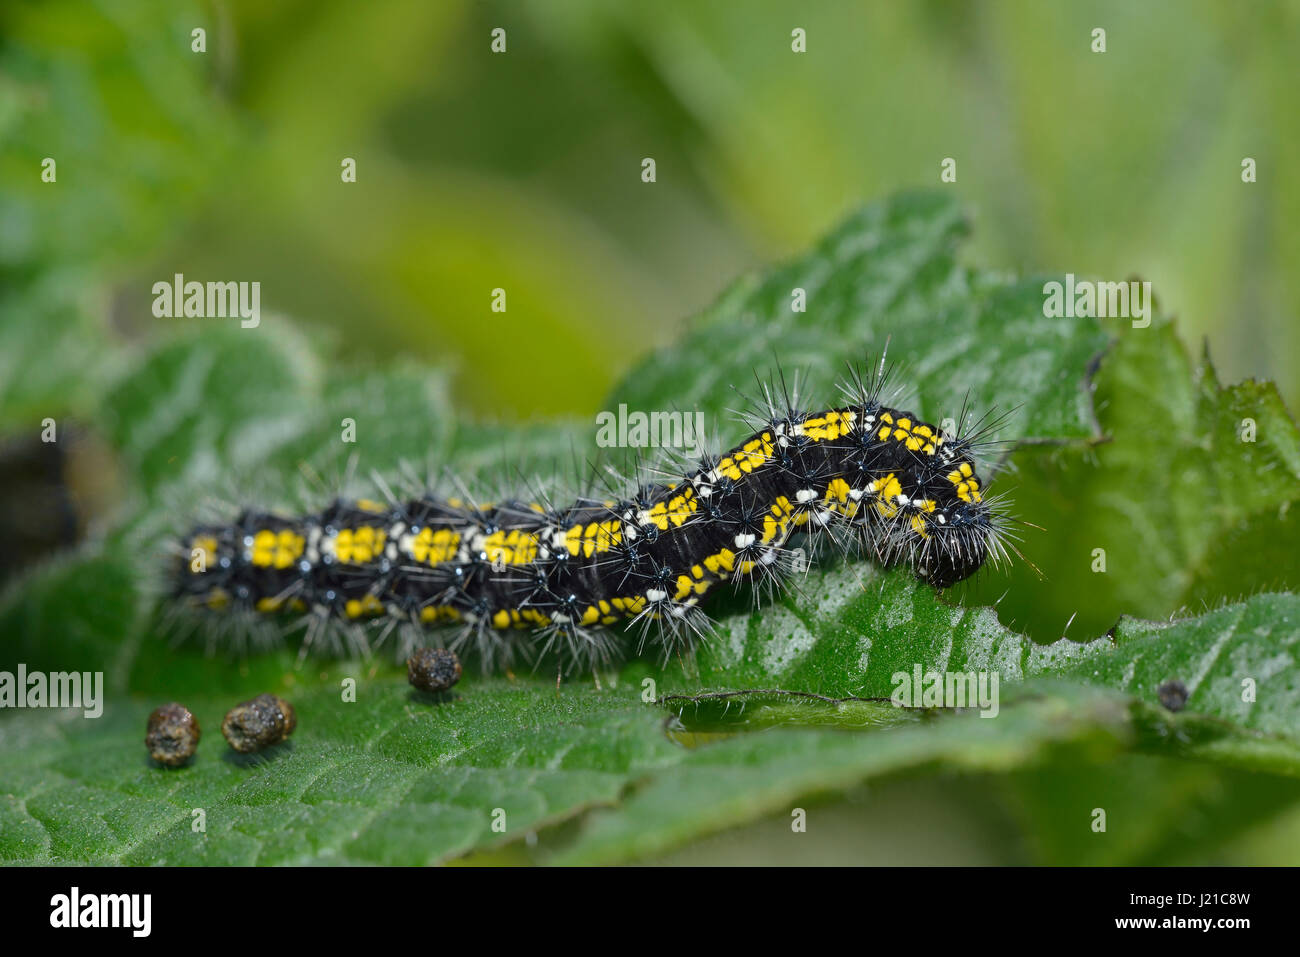 Caterpillar of Scarlet Tiger Moth - Panaxia dominula, feeding on Comfrey - Symphytum officinale Stock Photo